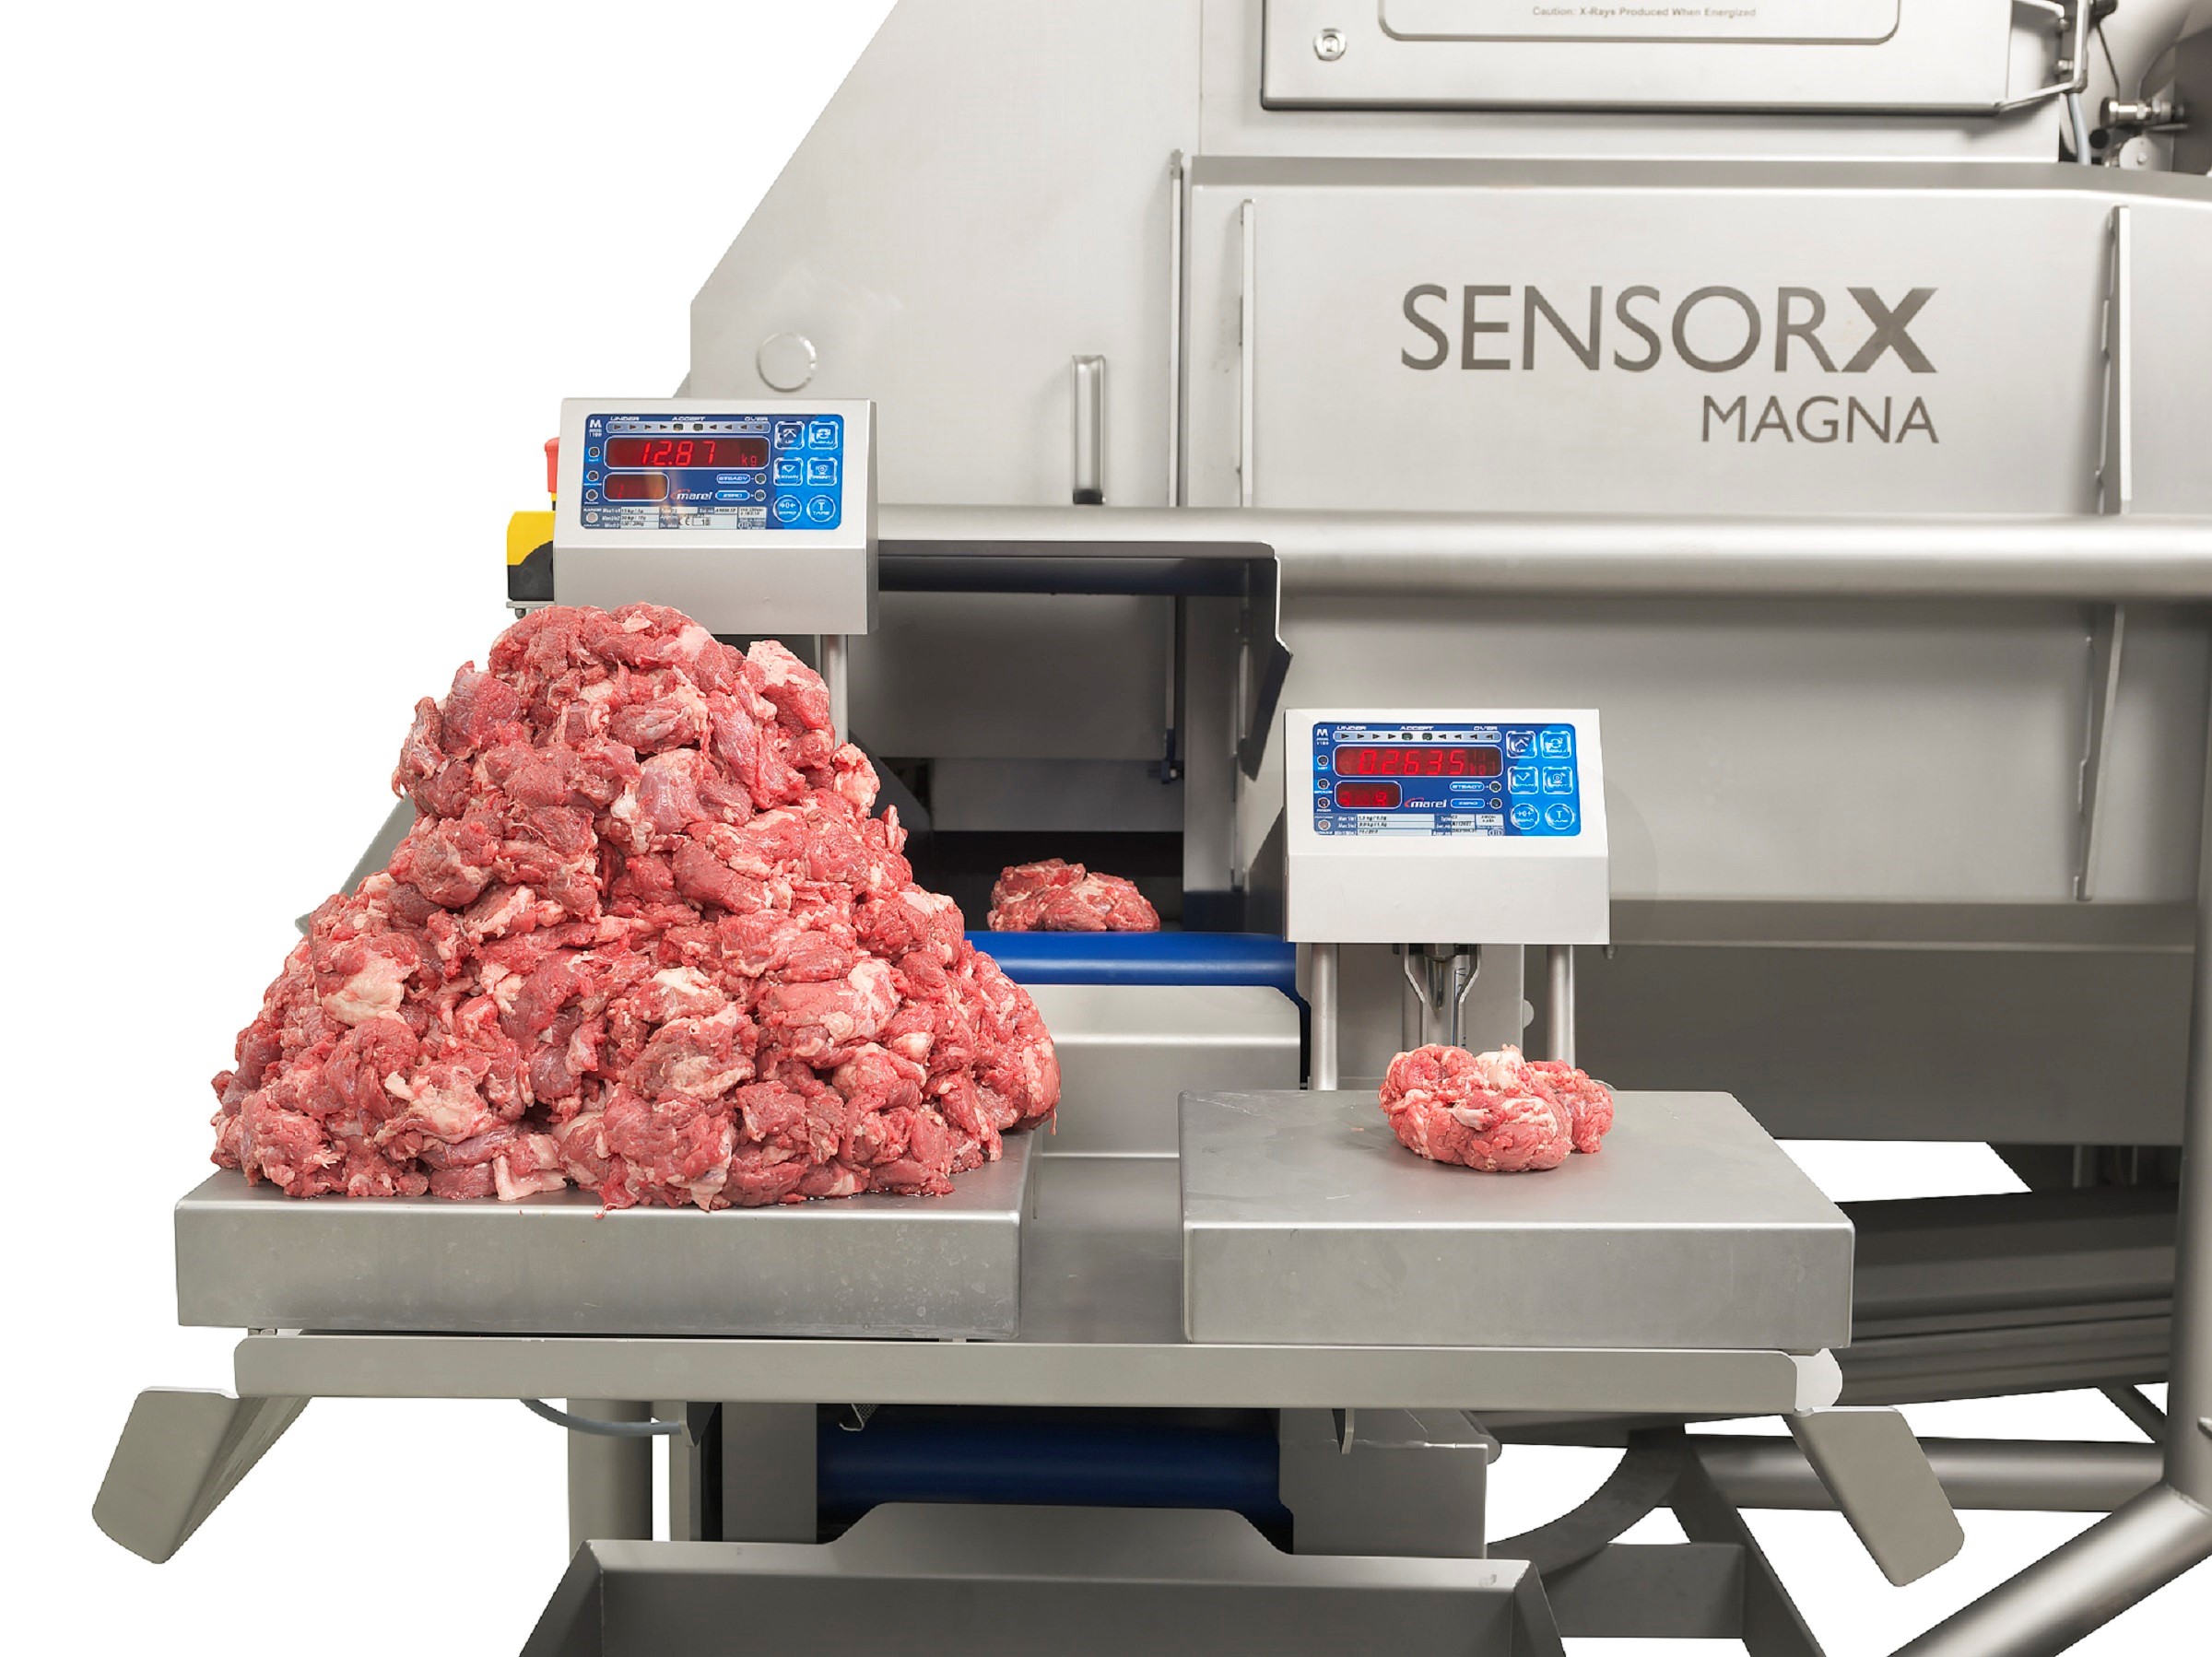 Sensorx Magna Rejects Bone With Unprecedented Low Amount Of Raw Material